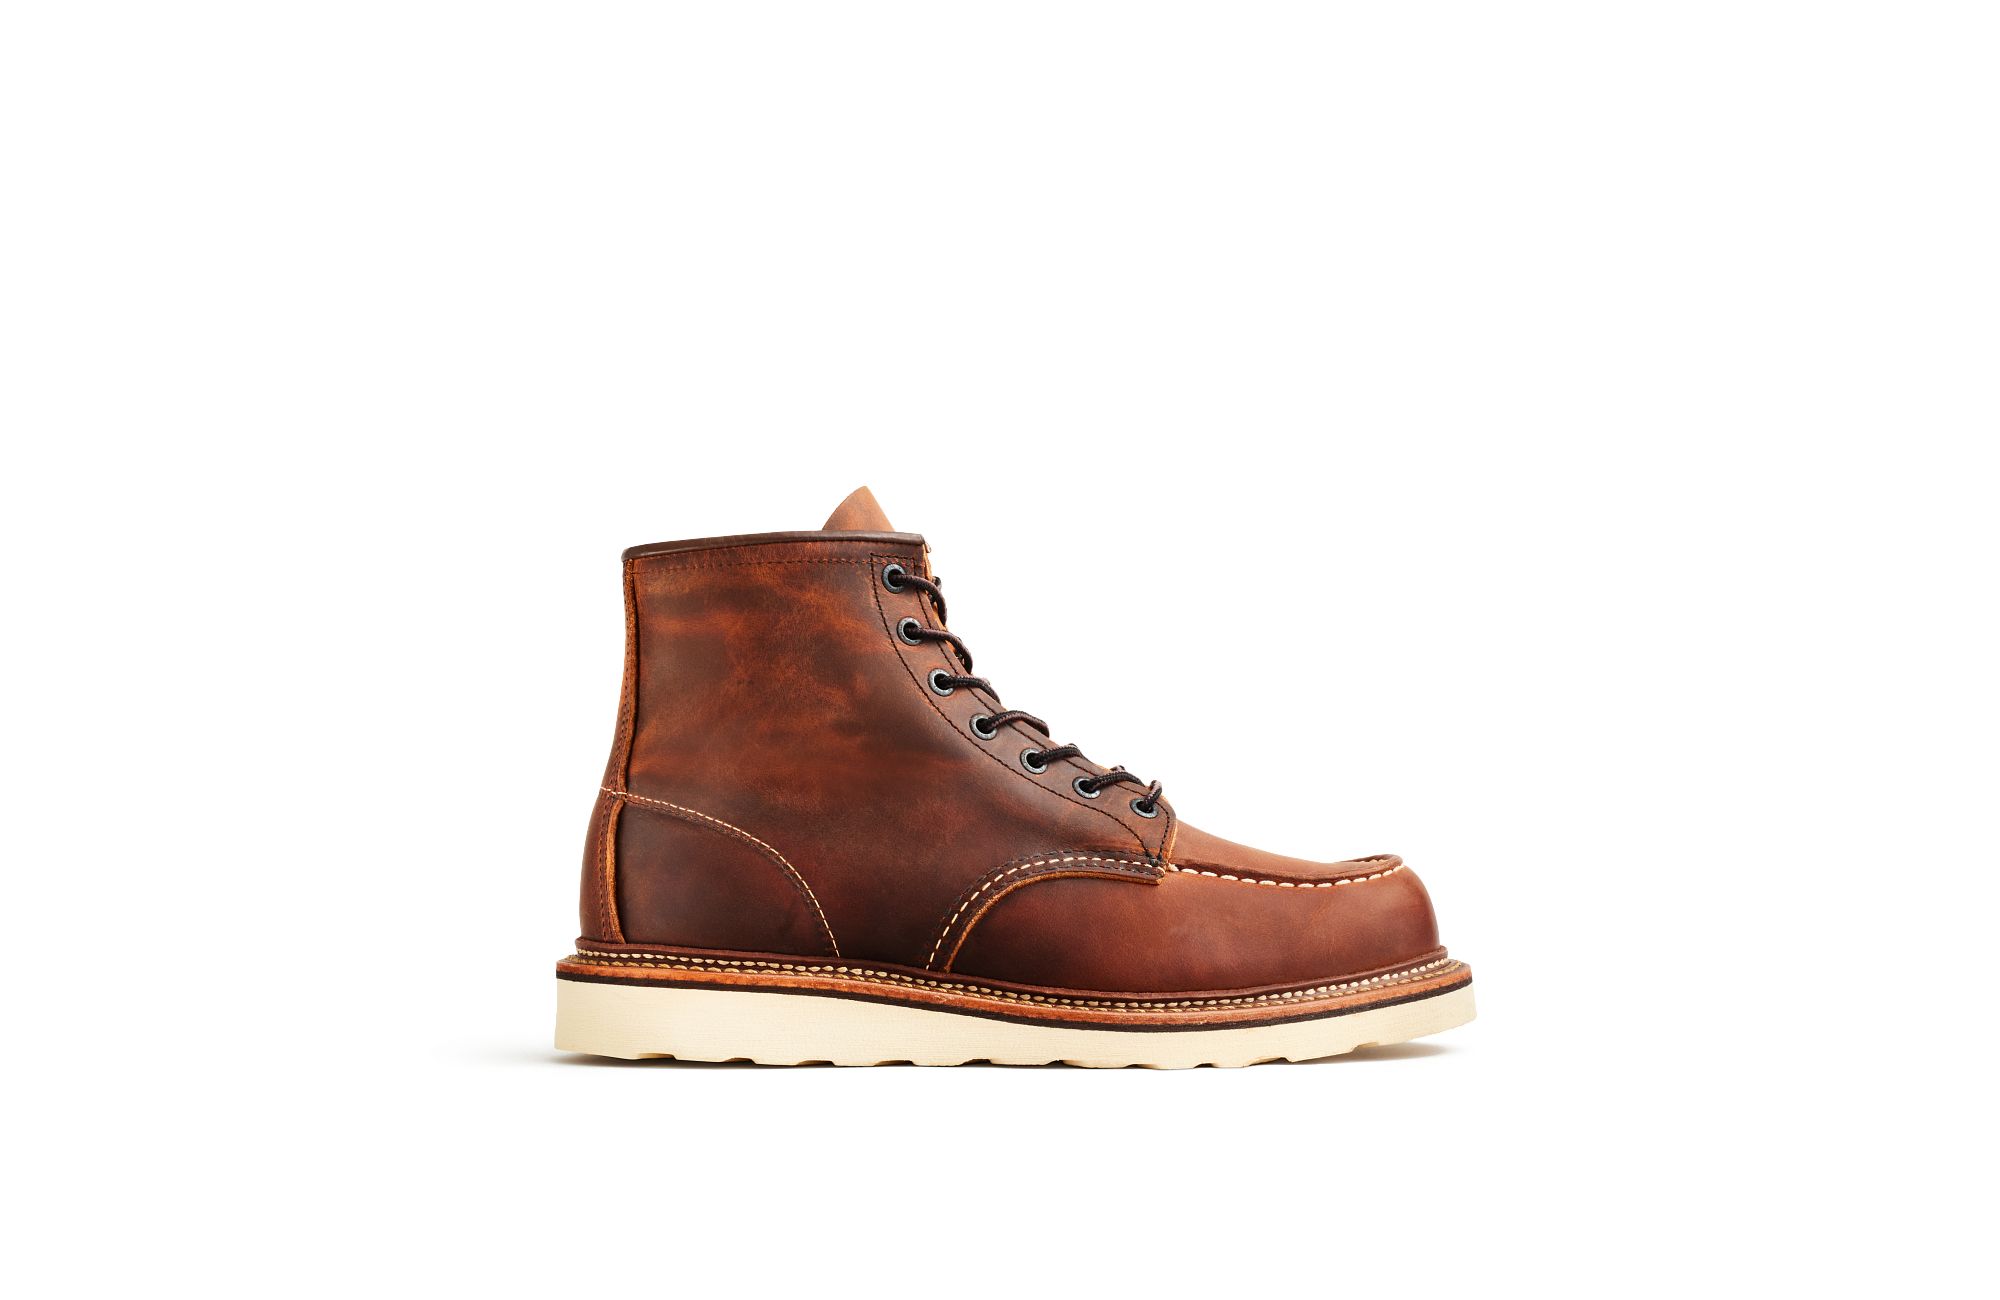 Eso aplausos Sinceridad Classic Moc | Red Wing